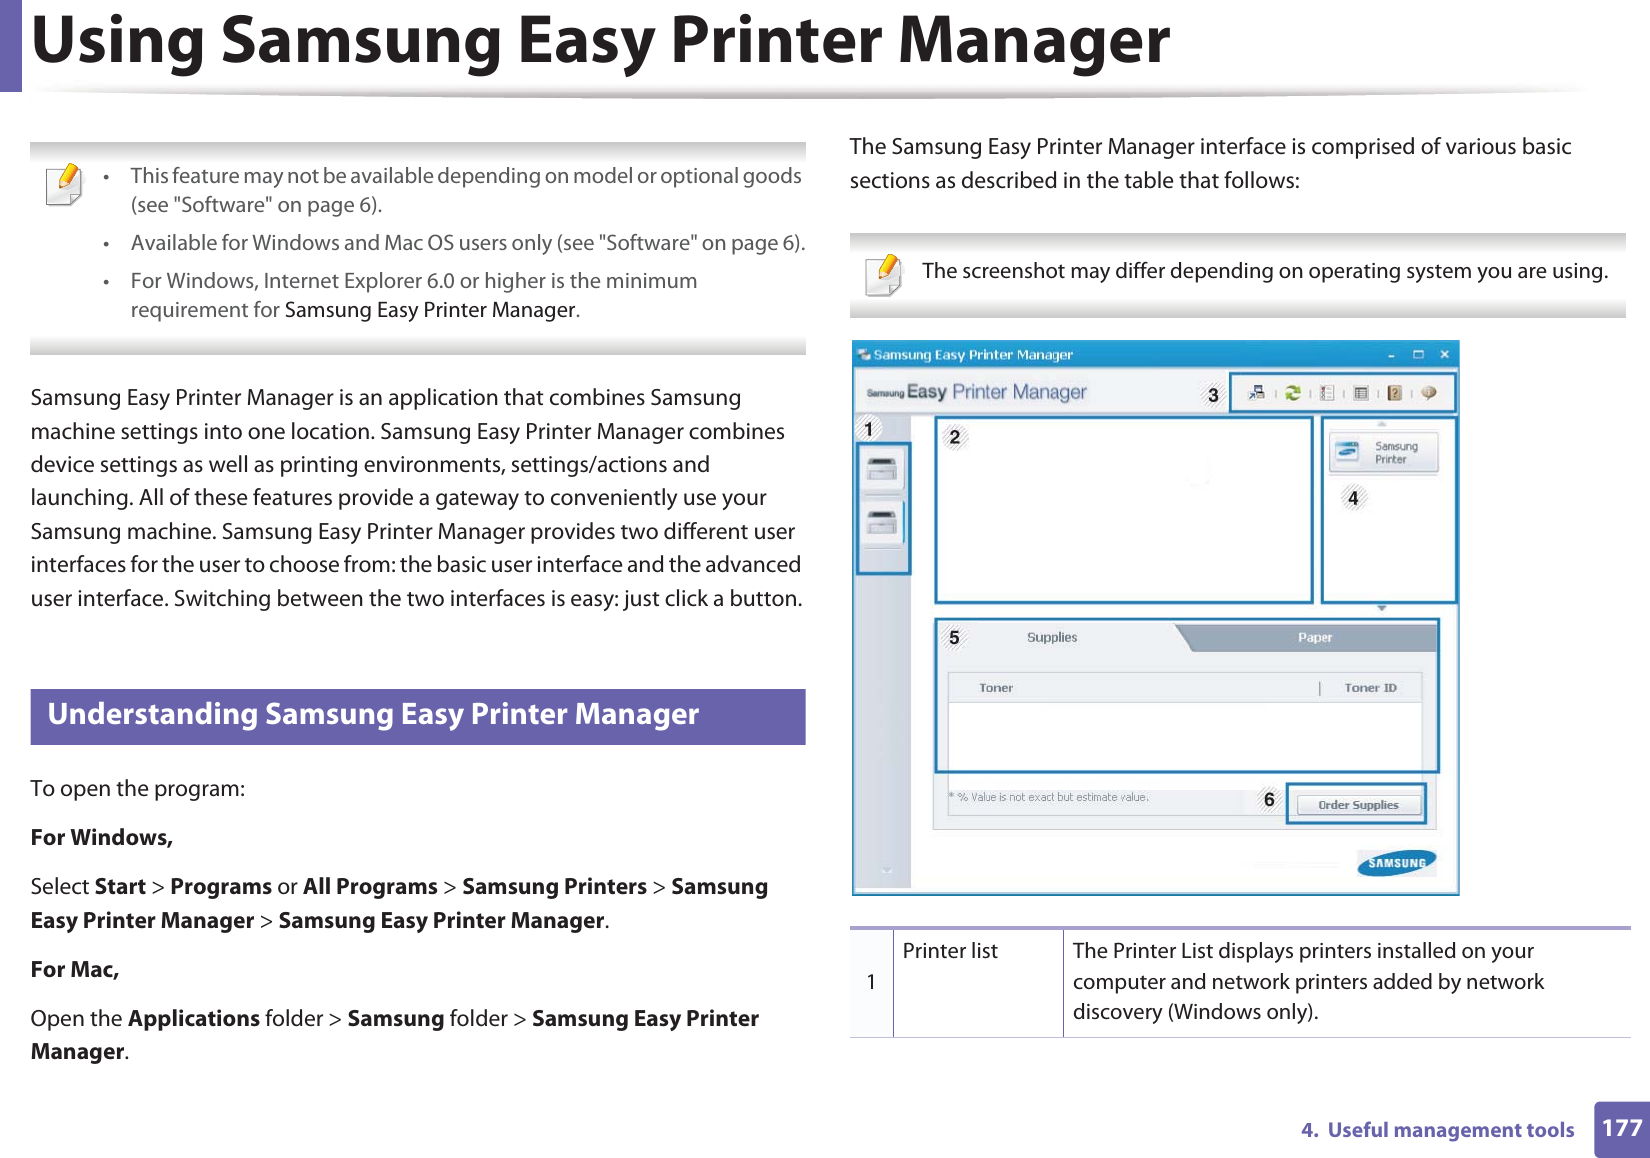 1774.  Useful management toolsUsing Samsung Easy Printer Manager  • This feature may not be available depending on model or optional goods (see &quot;Software&quot; on page 6).• Available for Windows and Mac OS users only (see &quot;Software&quot; on page 6).• For Windows, Internet Explorer 6.0 or higher is the minimum requirement for Samsung Easy Printer Manager. Samsung Easy Printer Manager is an application that combines Samsung machine settings into one location. Samsung Easy Printer Manager combines device settings as well as printing environments, settings/actions and launching. All of these features provide a gateway to conveniently use your Samsung machine. Samsung Easy Printer Manager provides two different user interfaces for the user to choose from: the basic user interface and the advanced user interface. Switching between the two interfaces is easy: just click a button.4 Understanding Samsung Easy Printer ManagerTo open the program: For Windows,Select Start &gt; Programs or All Programs &gt; Samsung Printers &gt; Samsung Easy Printer Manager &gt; Samsung Easy Printer Manager.For Mac,Open the Applications folder &gt; Samsung folder &gt; Samsung Easy Printer Manager.The Samsung Easy Printer Manager interface is comprised of various basic sections as described in the table that follows: The screenshot may differ depending on operating system you are using. 1Printer list The Printer List displays printers installed on your computer and network printers added by network discovery (Windows only).